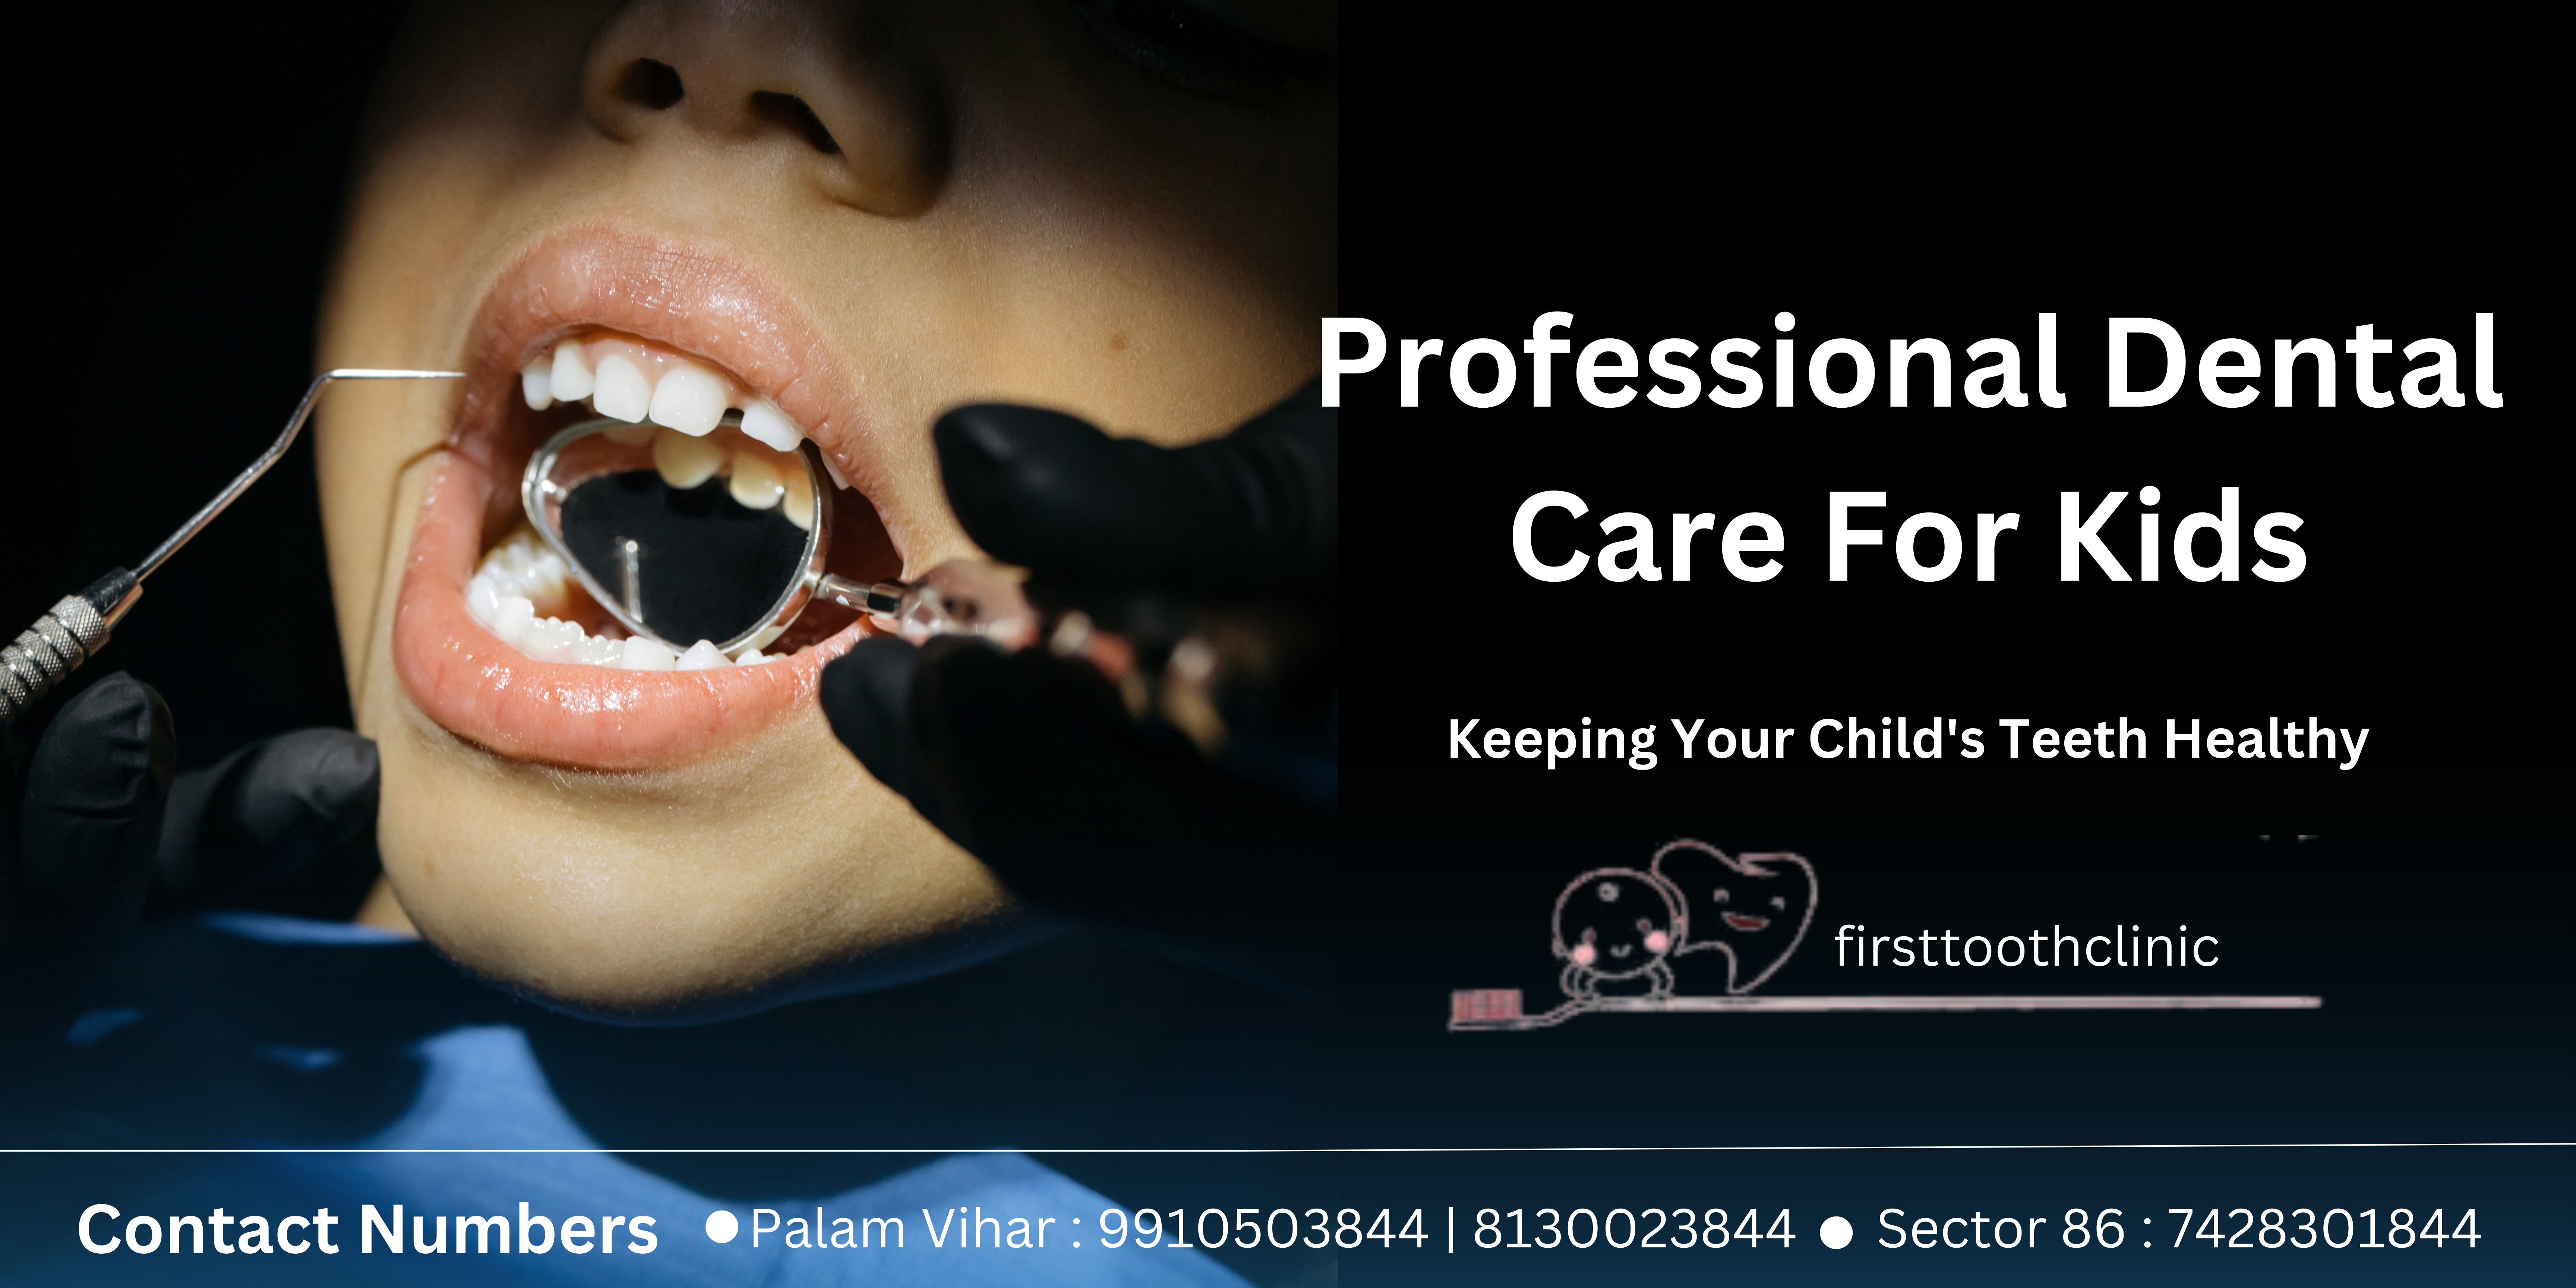 Professional dental care for kids-Firstoothclinic